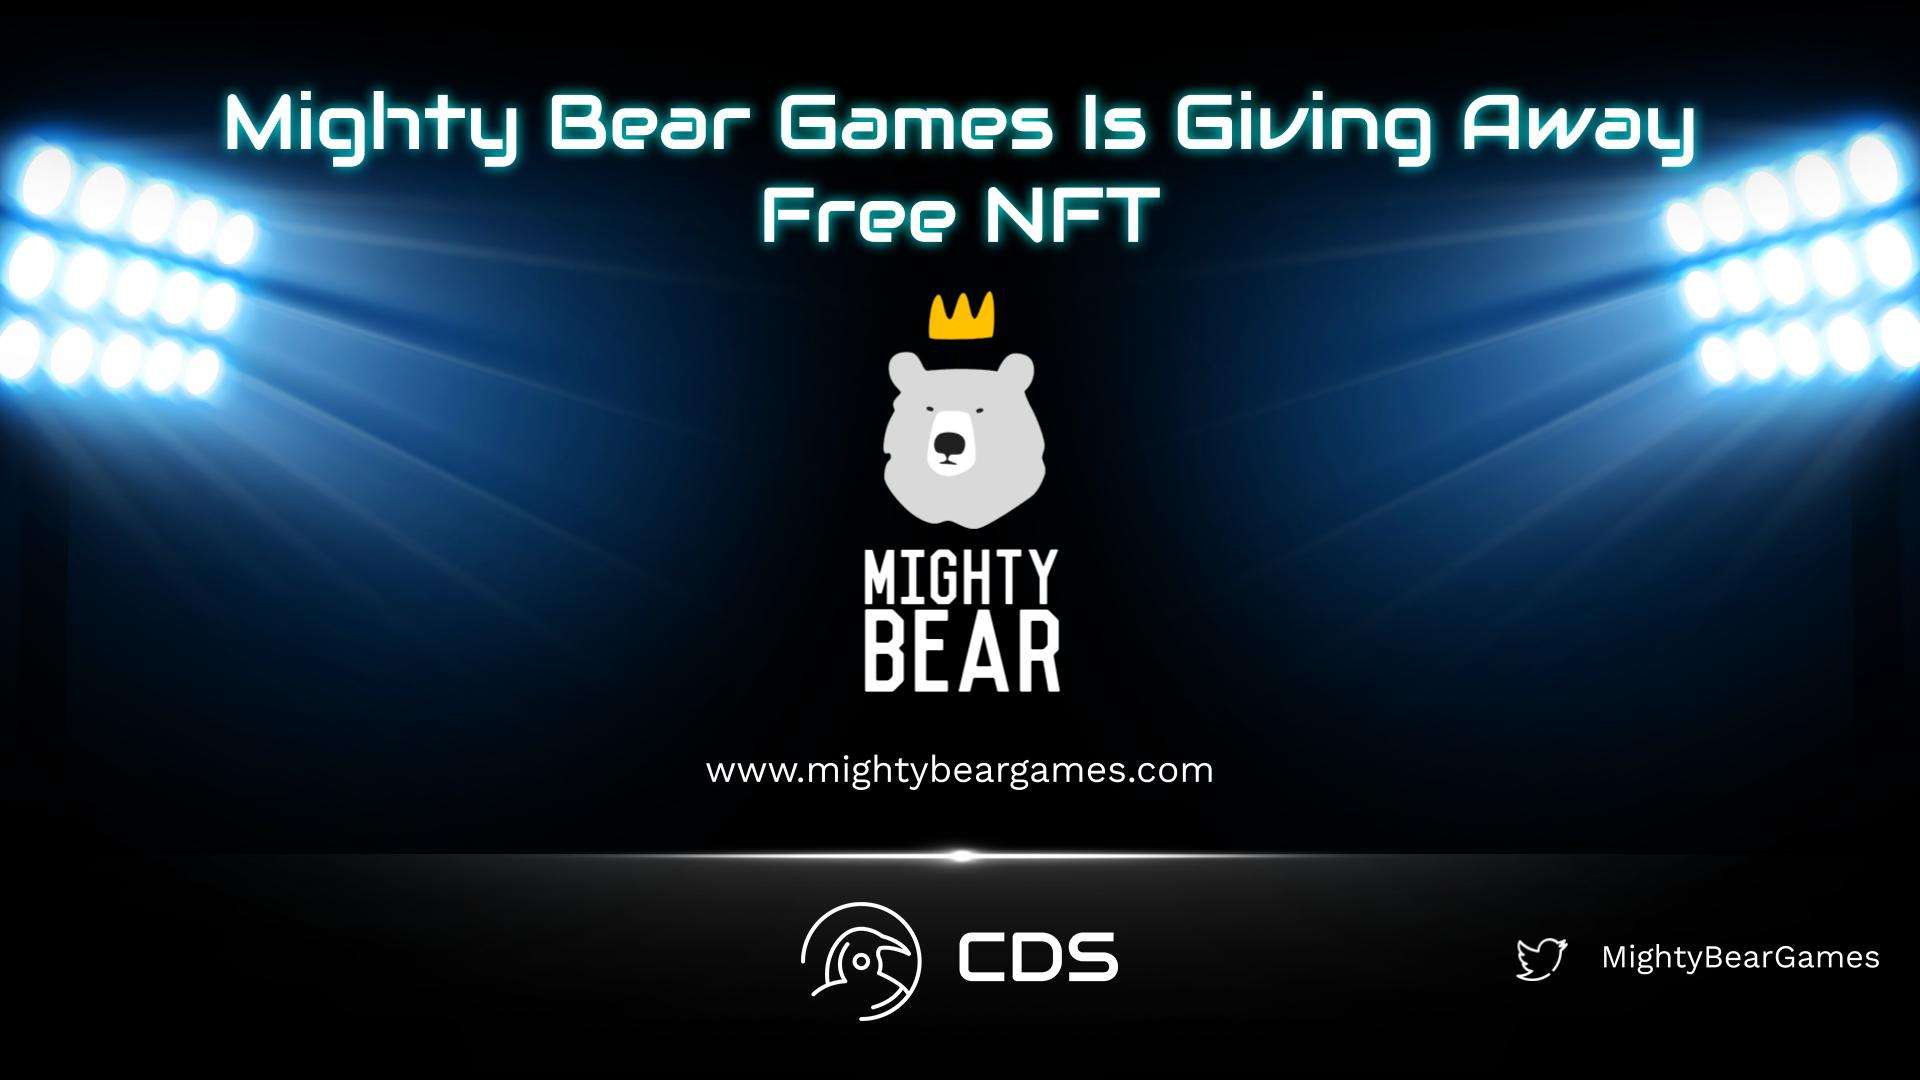 Mighty Bear Games Is Giving Away Free NFT